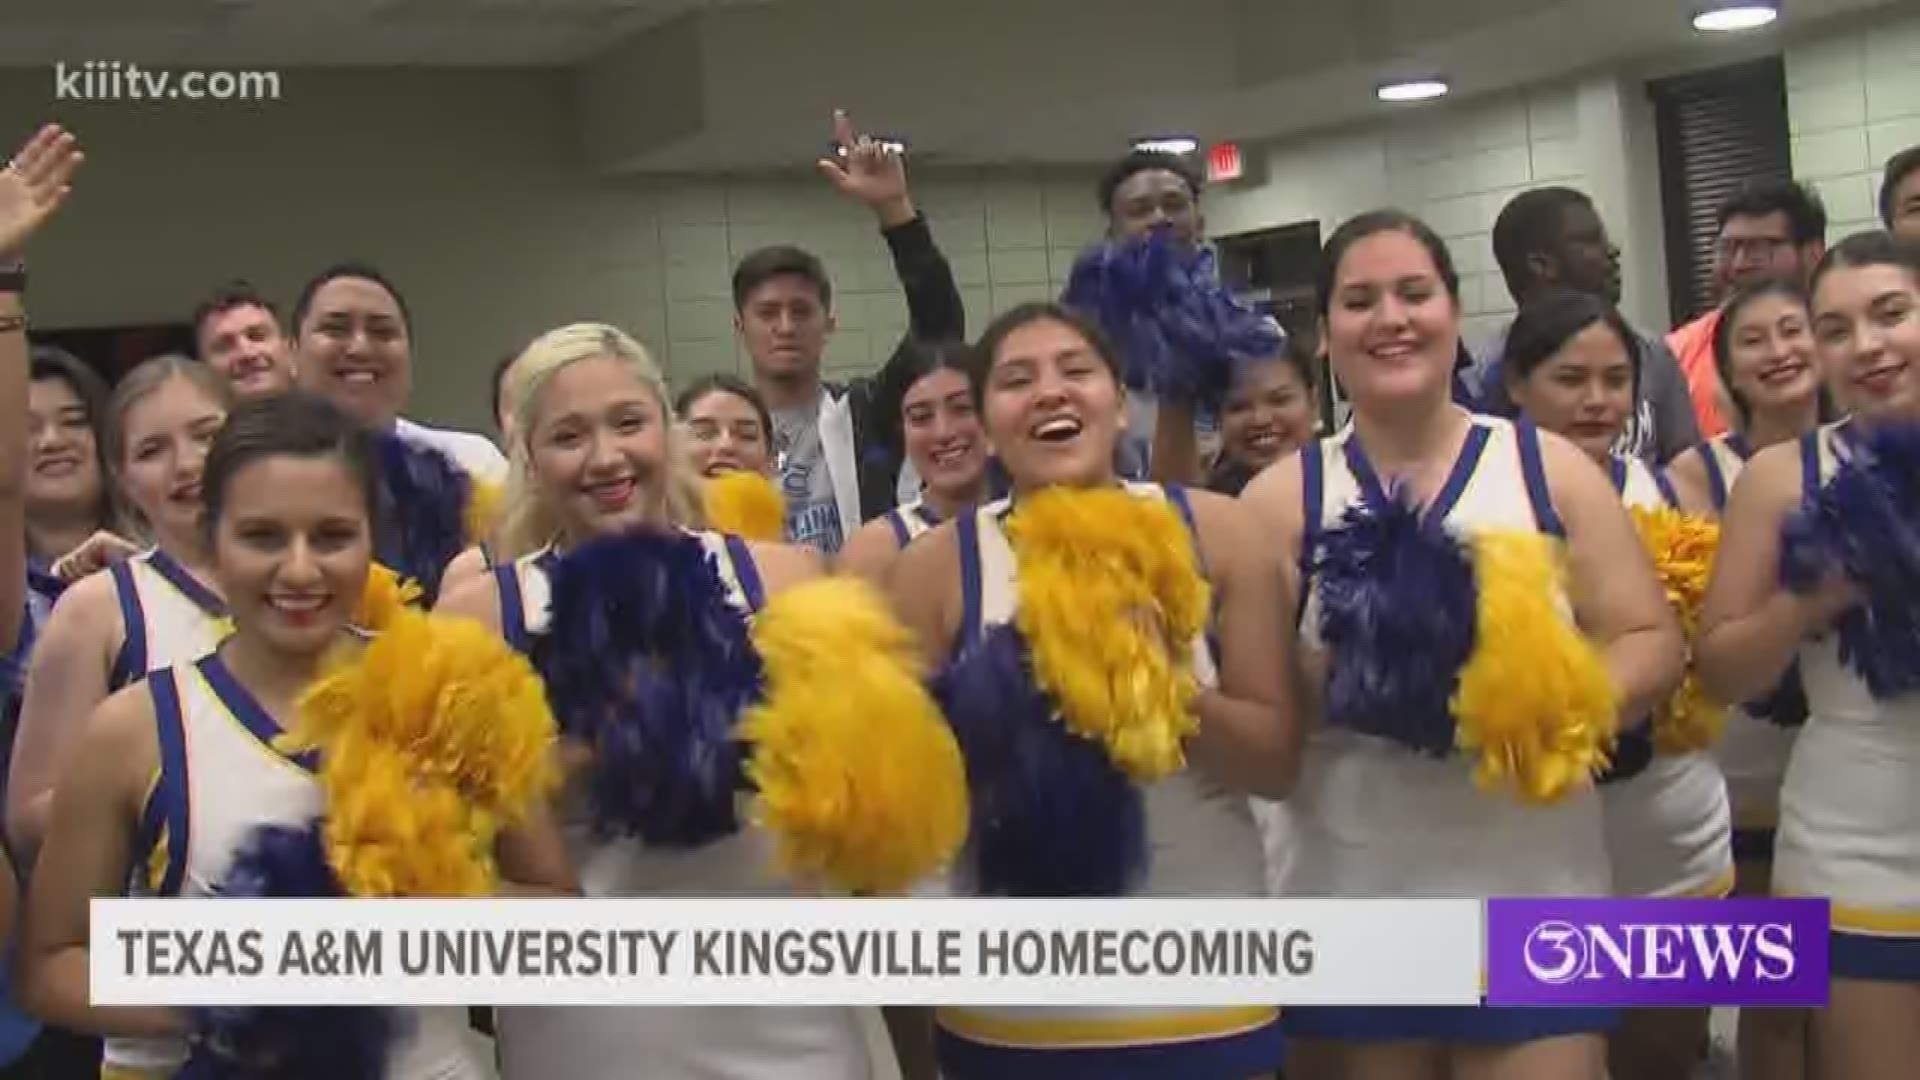 It's a special, fun-filled week at Texas A&M University-Kingsville as students and alumni celebrate Homecoming.